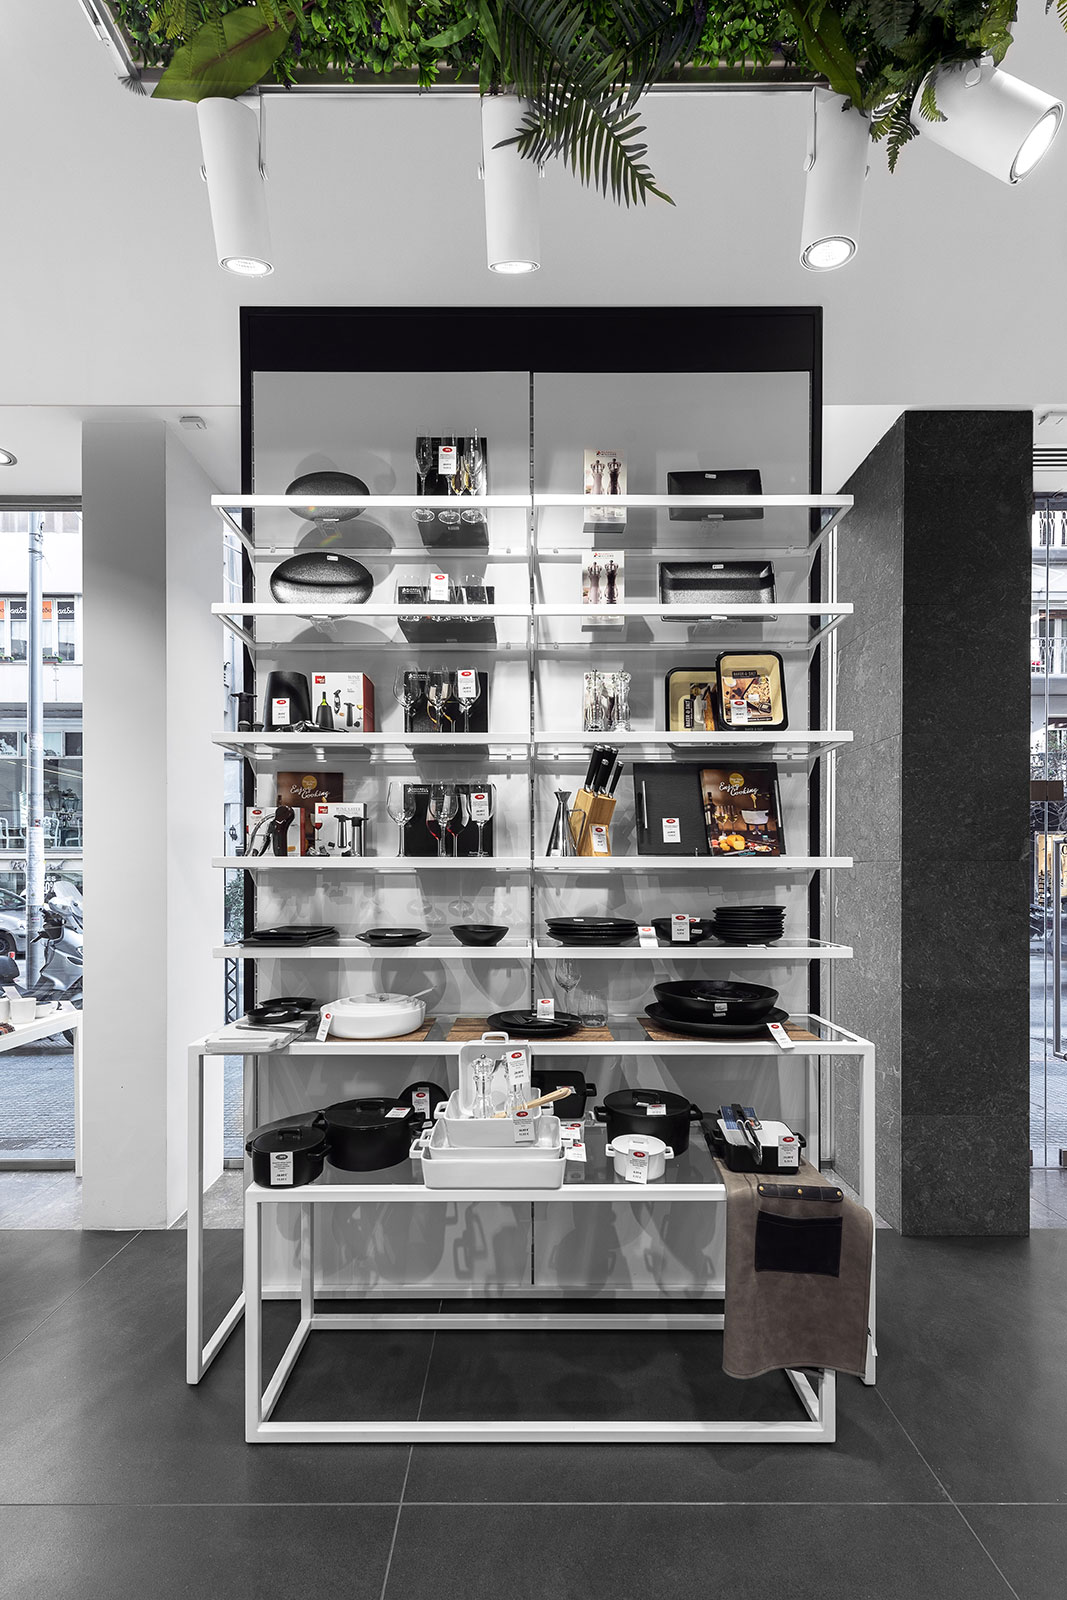 COOKSHOP Interior Design Awards 2020 T.SQUAREARCHITECTS Architectural Office tsquarearchitects.gr